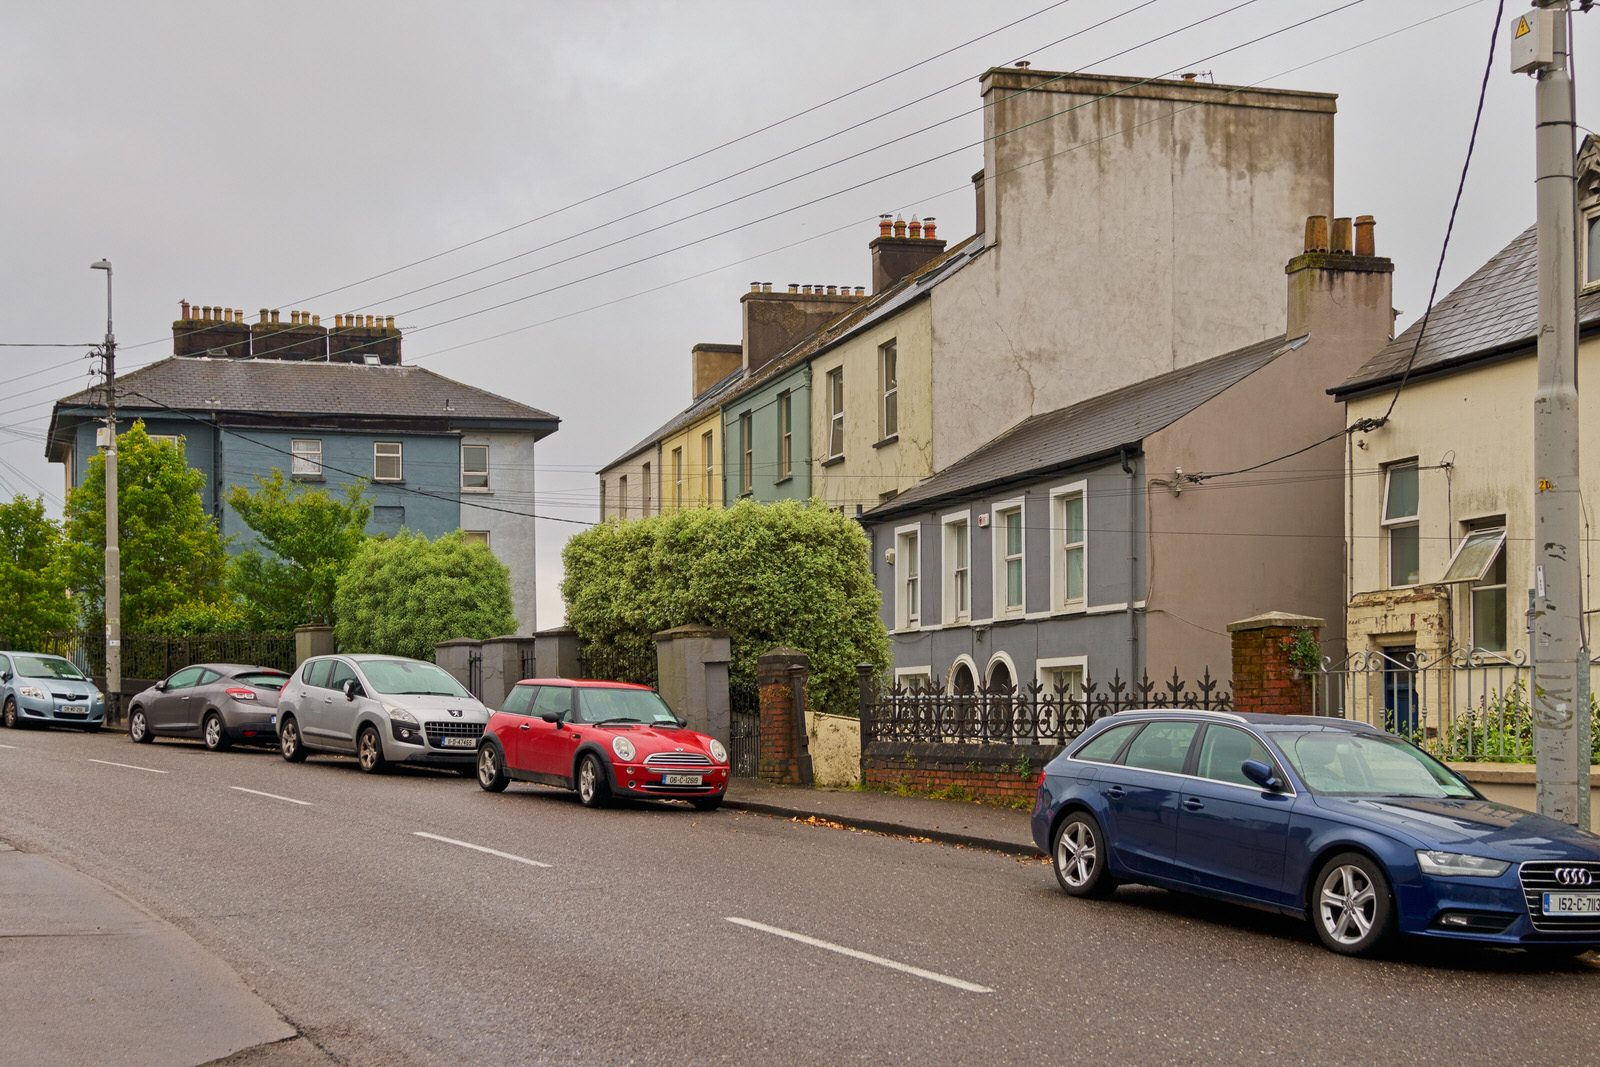 A WALK ALONG SUMMERHILL NORTH [IN CORK EVERYWHERE IS UPHILL OR DOWNHILL]-225799-1